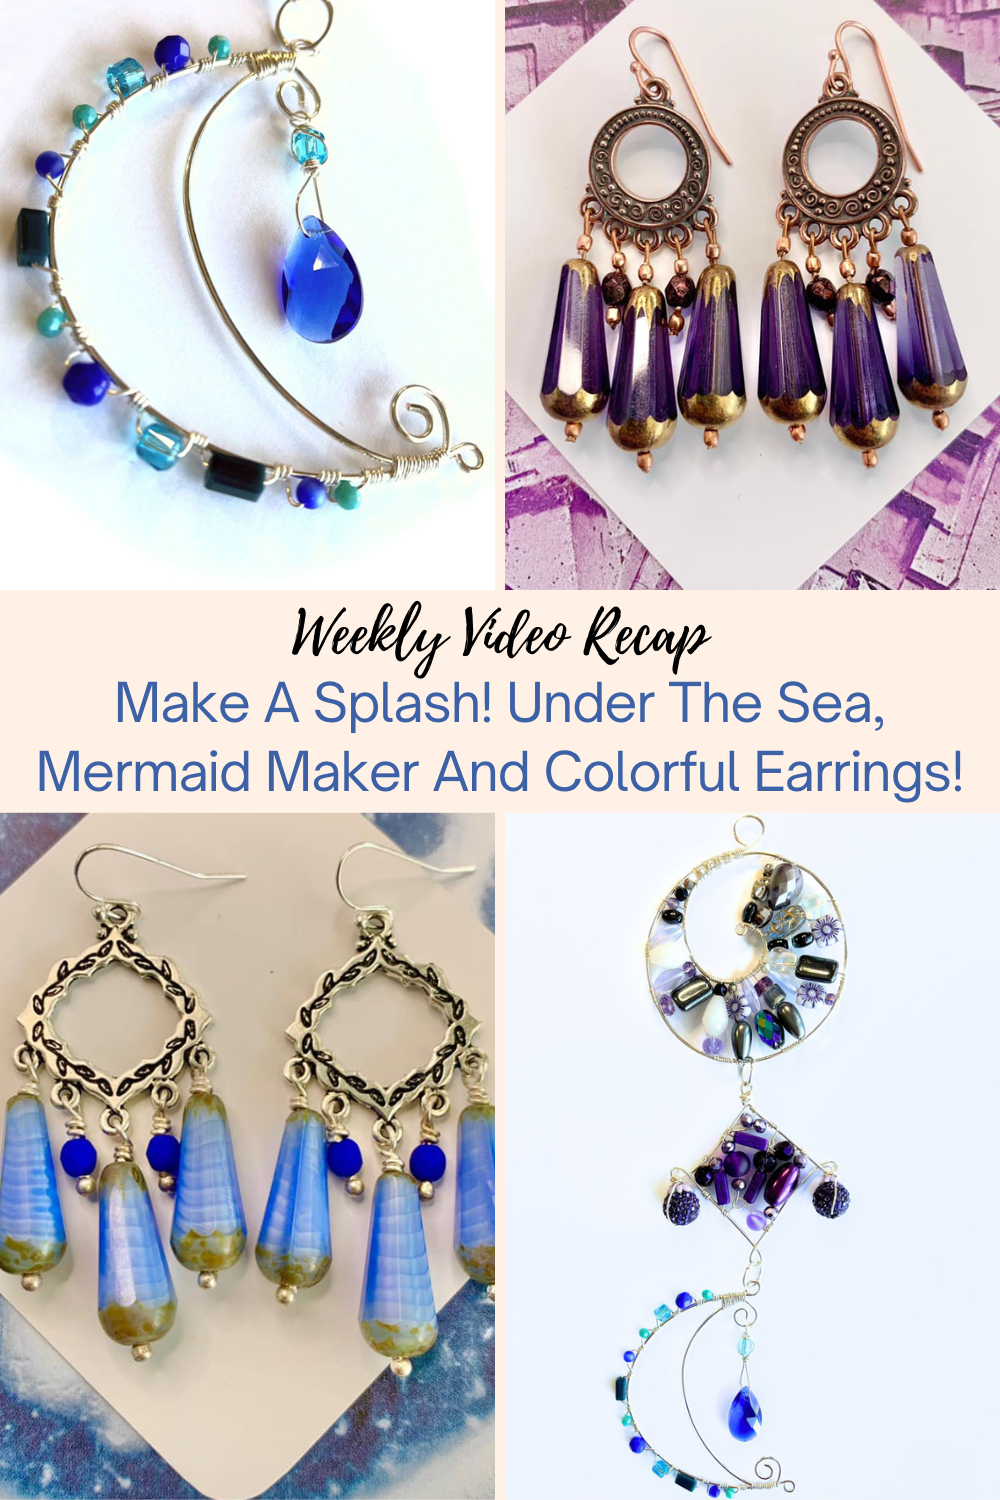 Make A Splash! Under The Sea, Mermaid Maker And Colorful Earrings! Collage